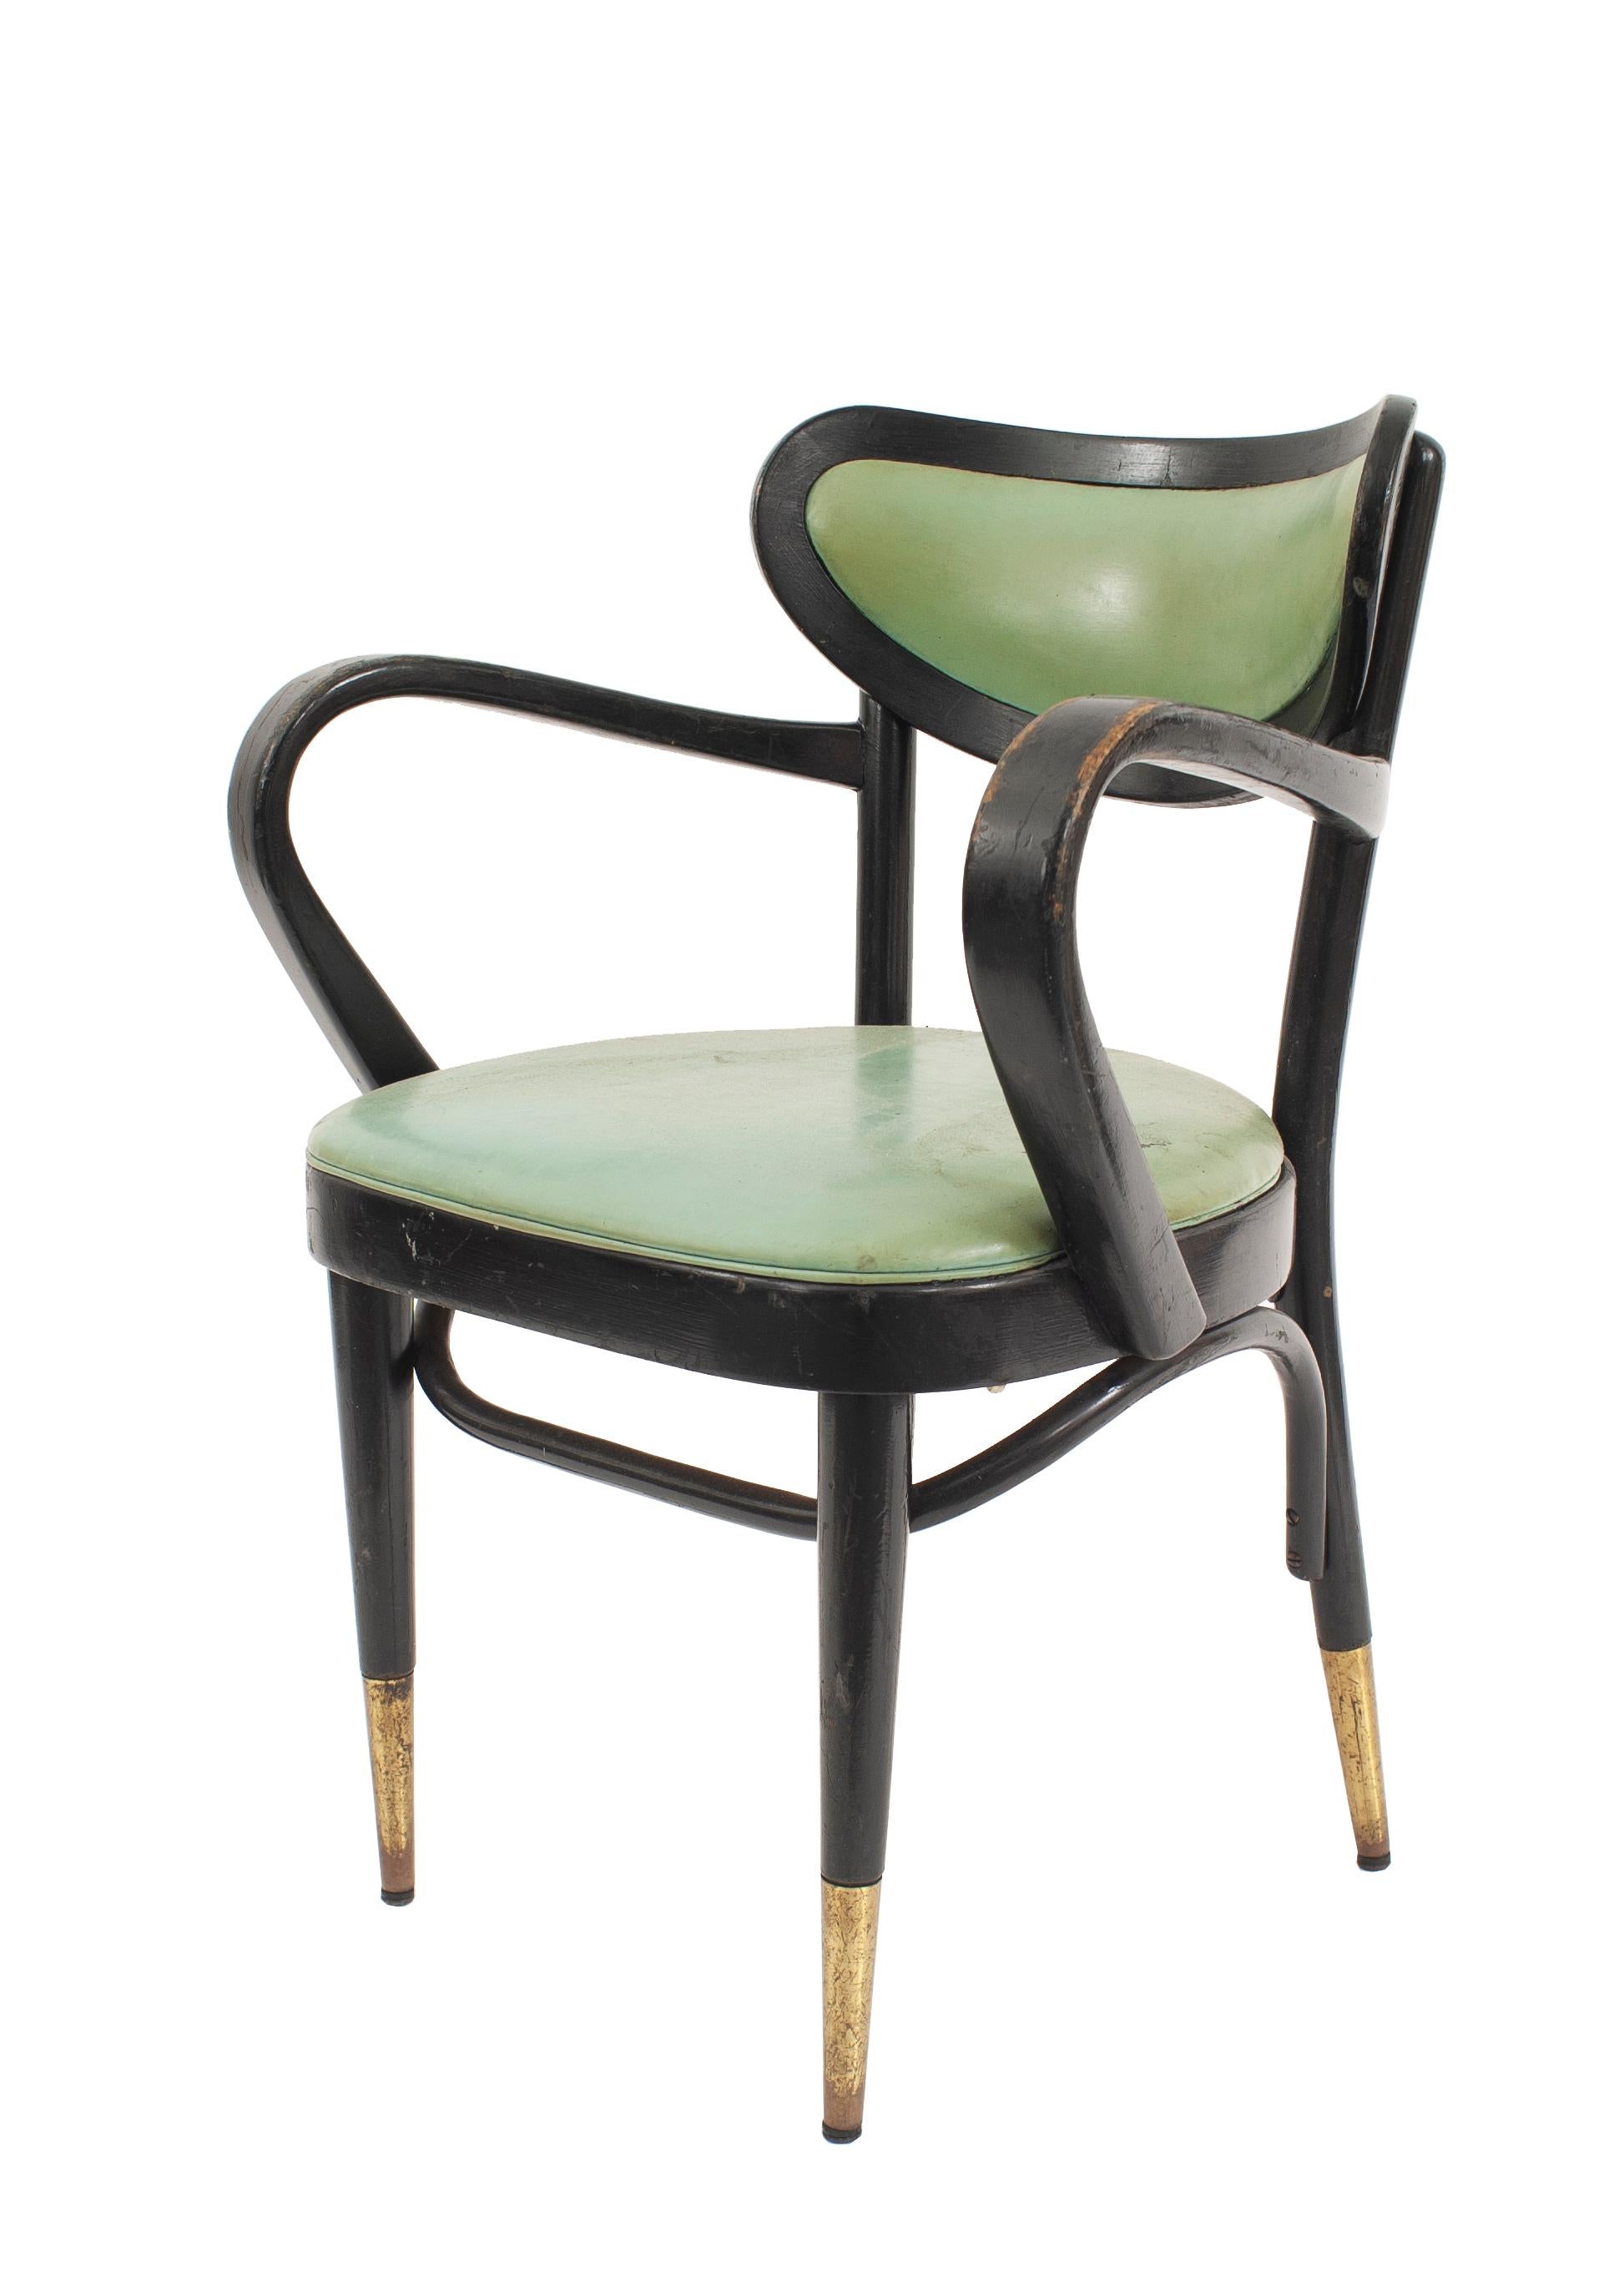 8 mid-century Bentwood side chairs having black painted frames with bowed arms & backs, green leather upholstery & brass leg sabots (priced each).
      